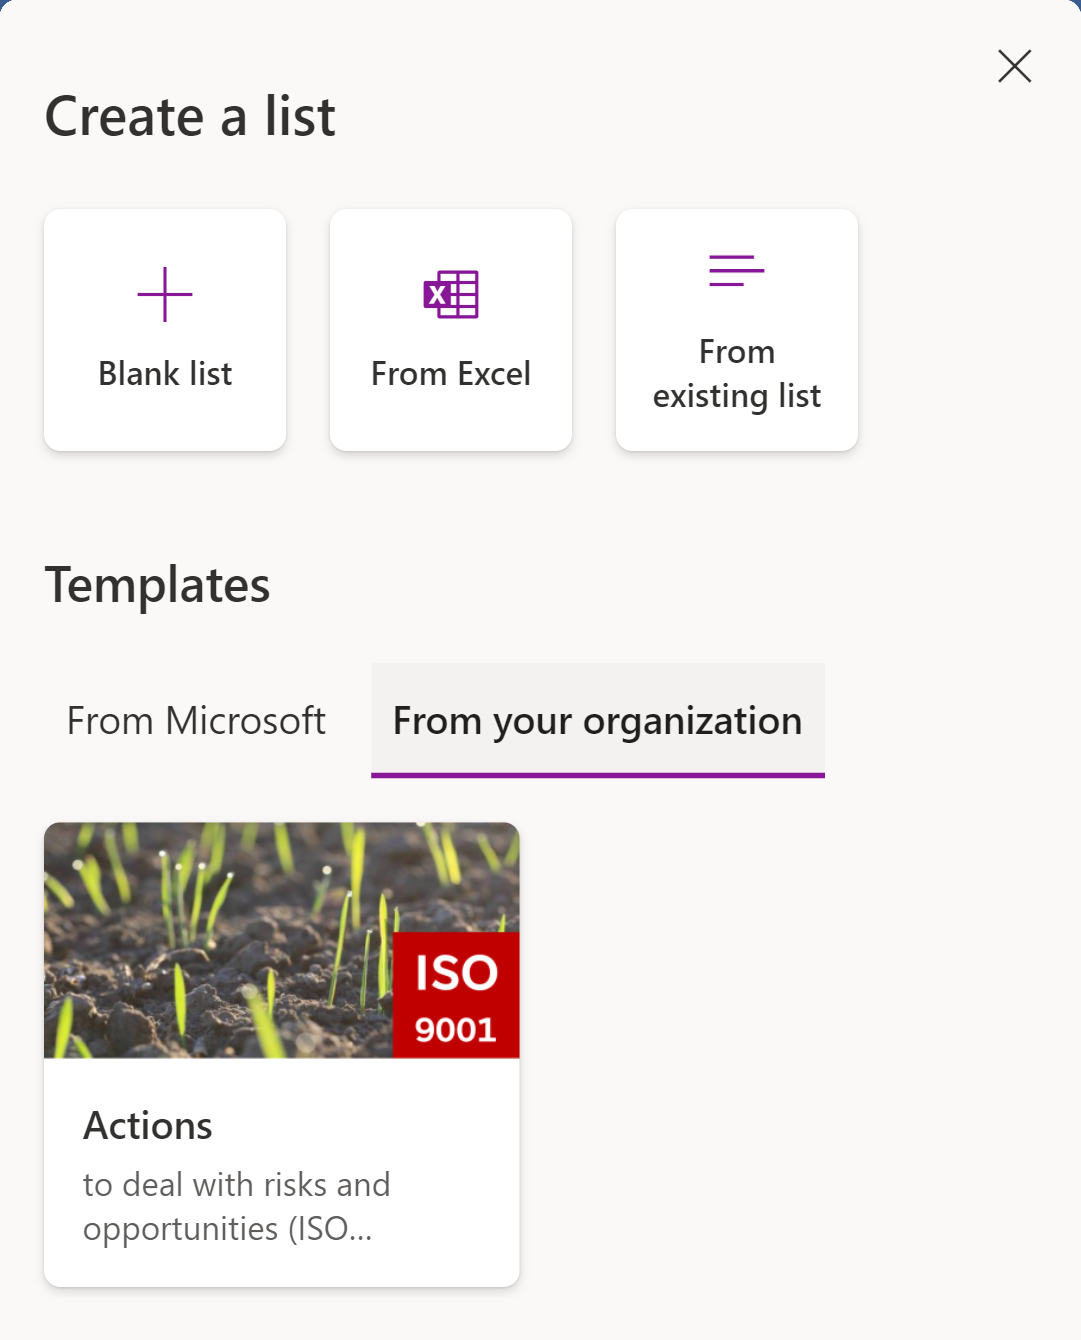 Create a list in SharePoint using Templates from your organization